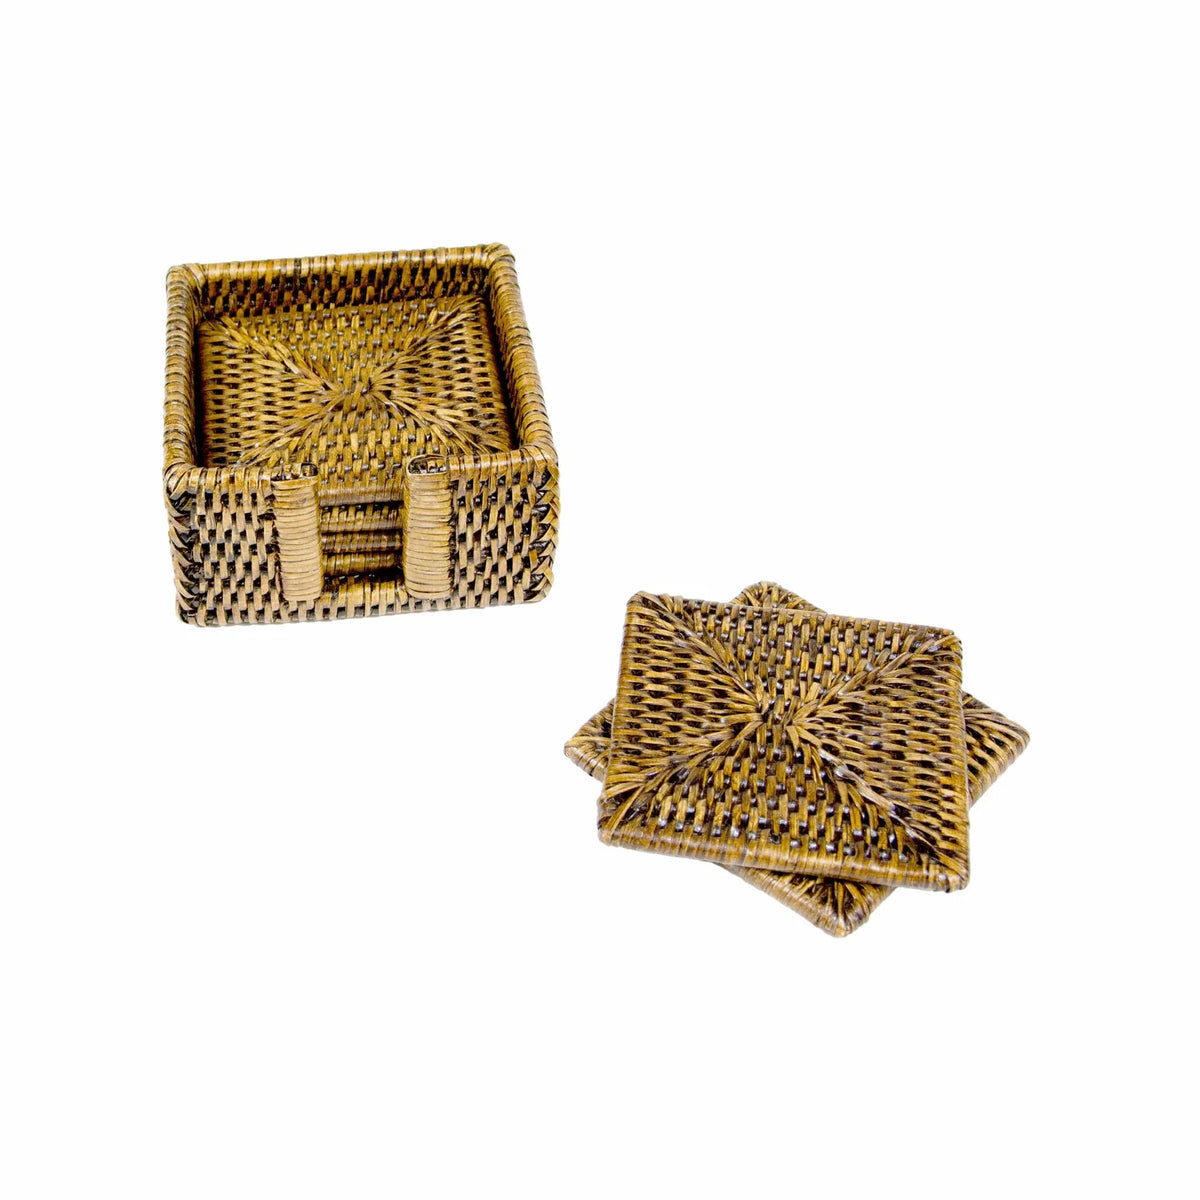 Rattan Square Coaster and Holder Set in Honey